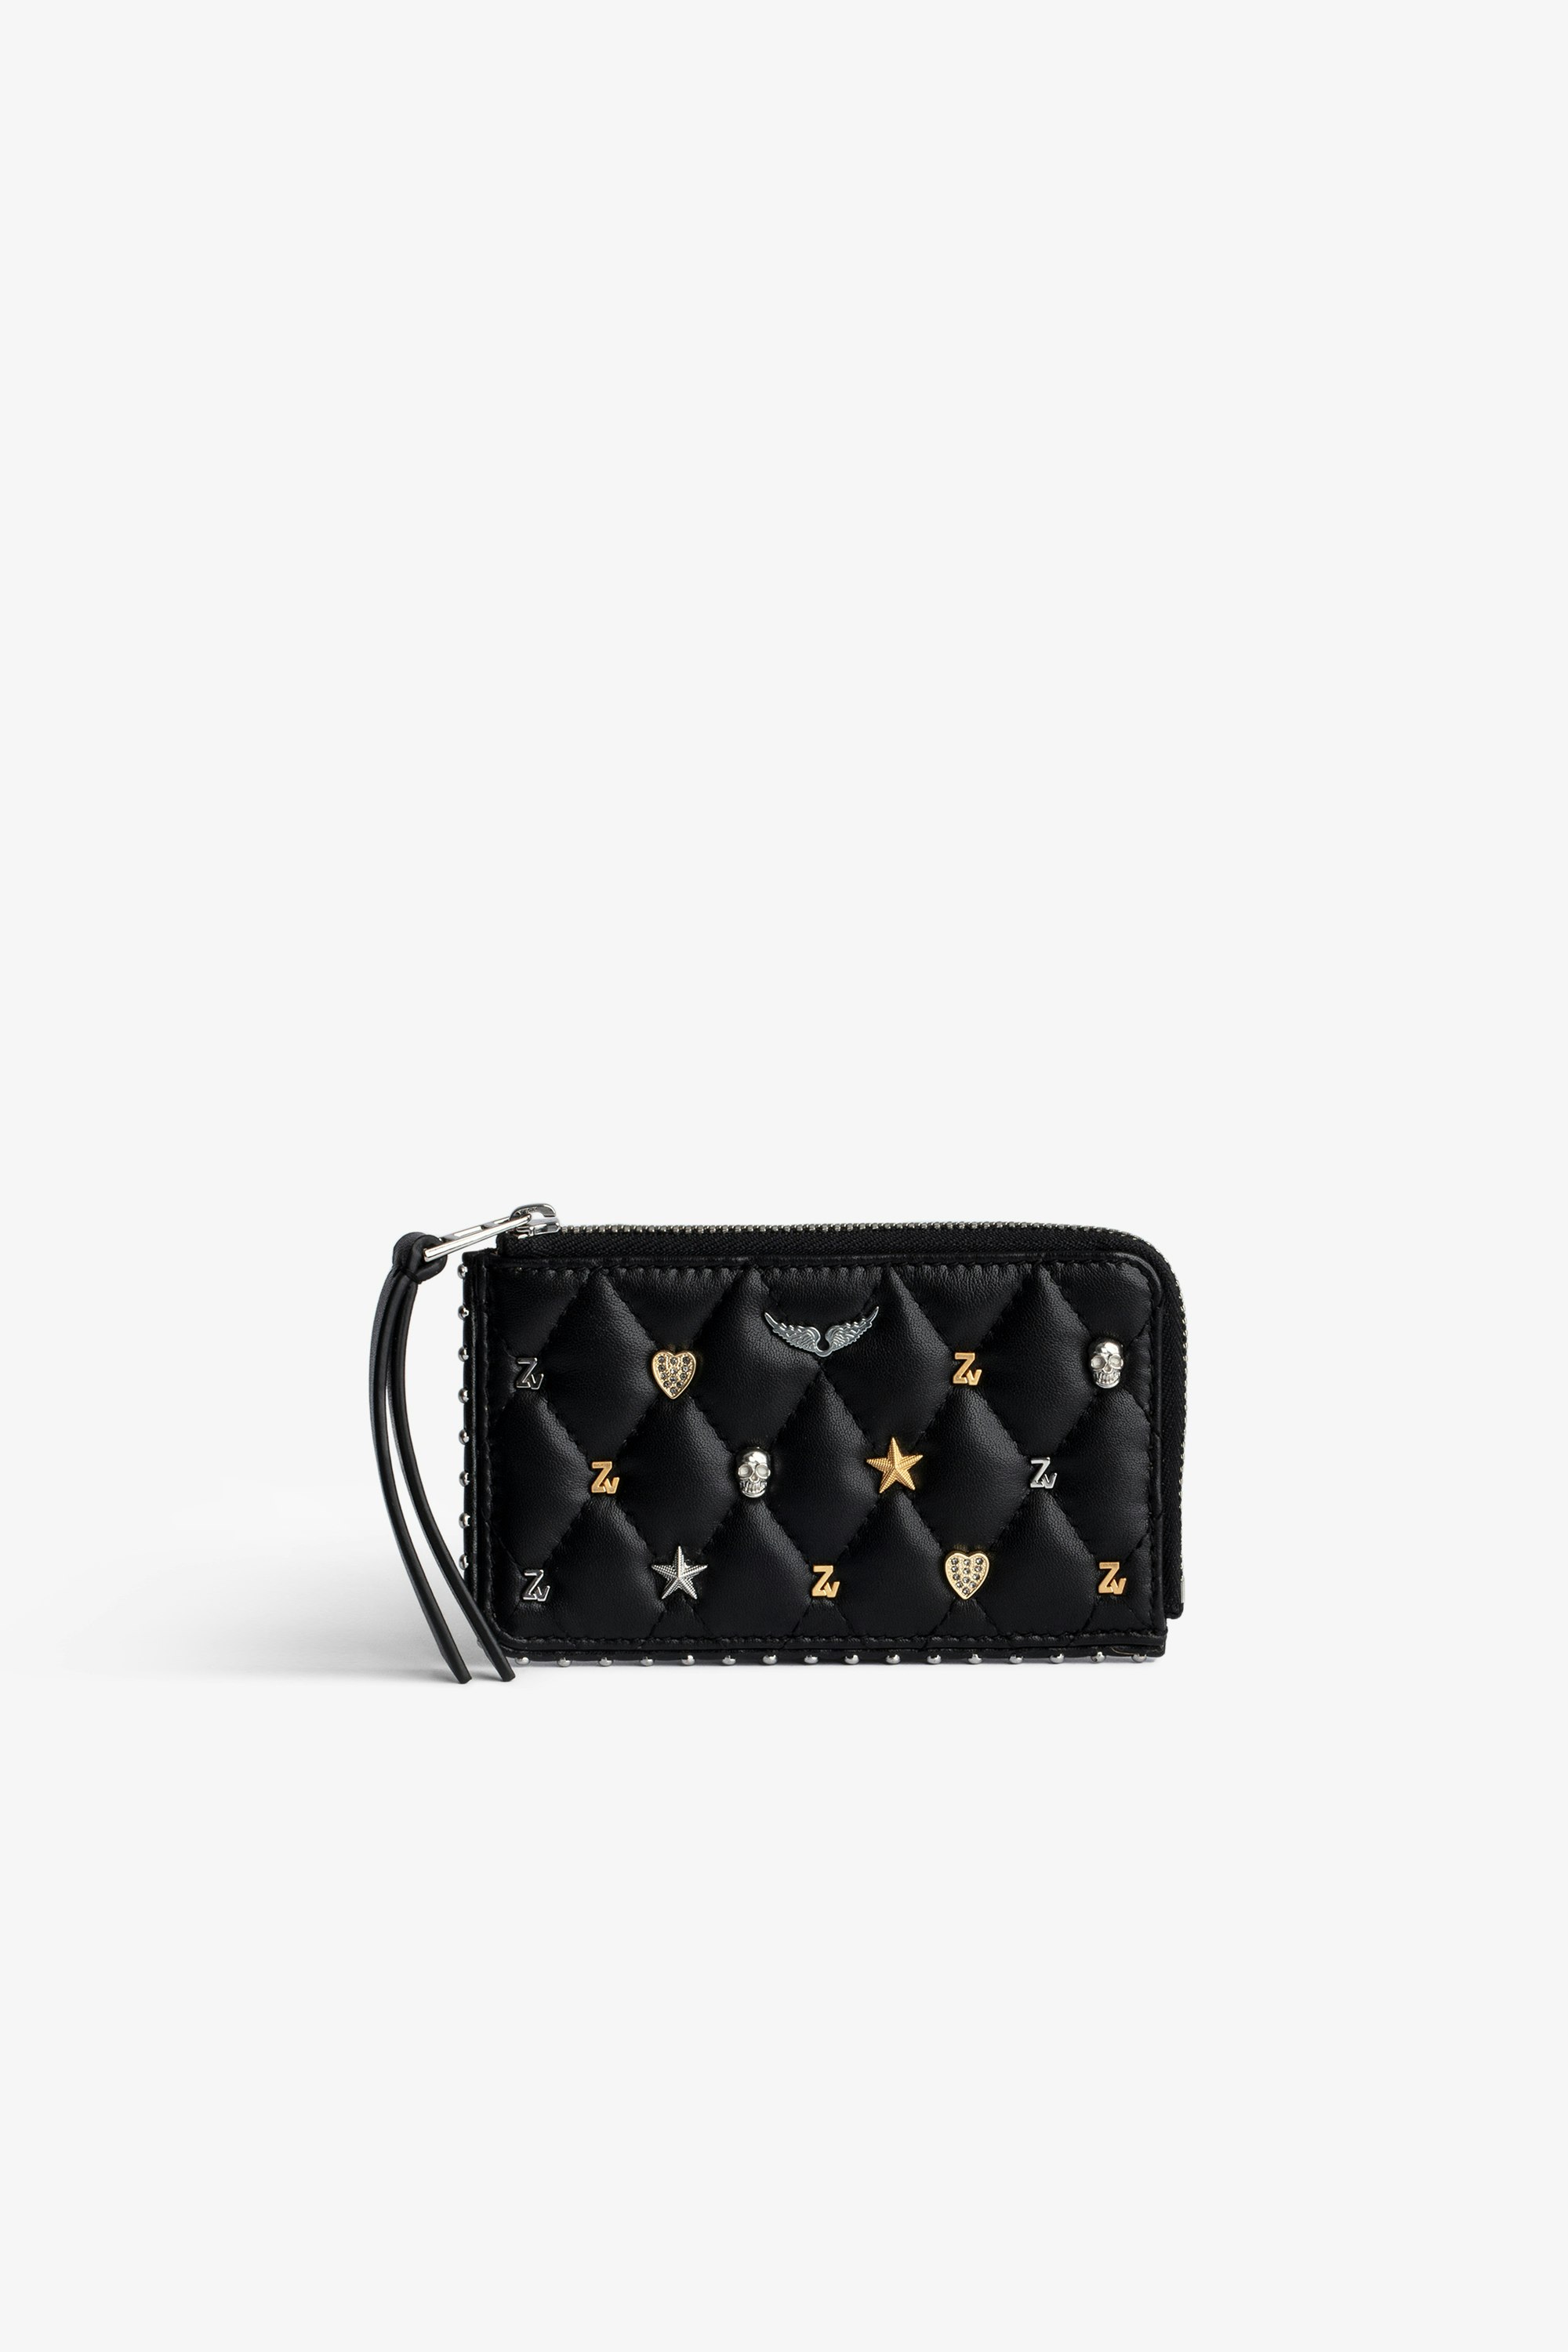 ZV Card 財布 Women’s black quilted leather zipped card holder with silver- and gold-tone charms